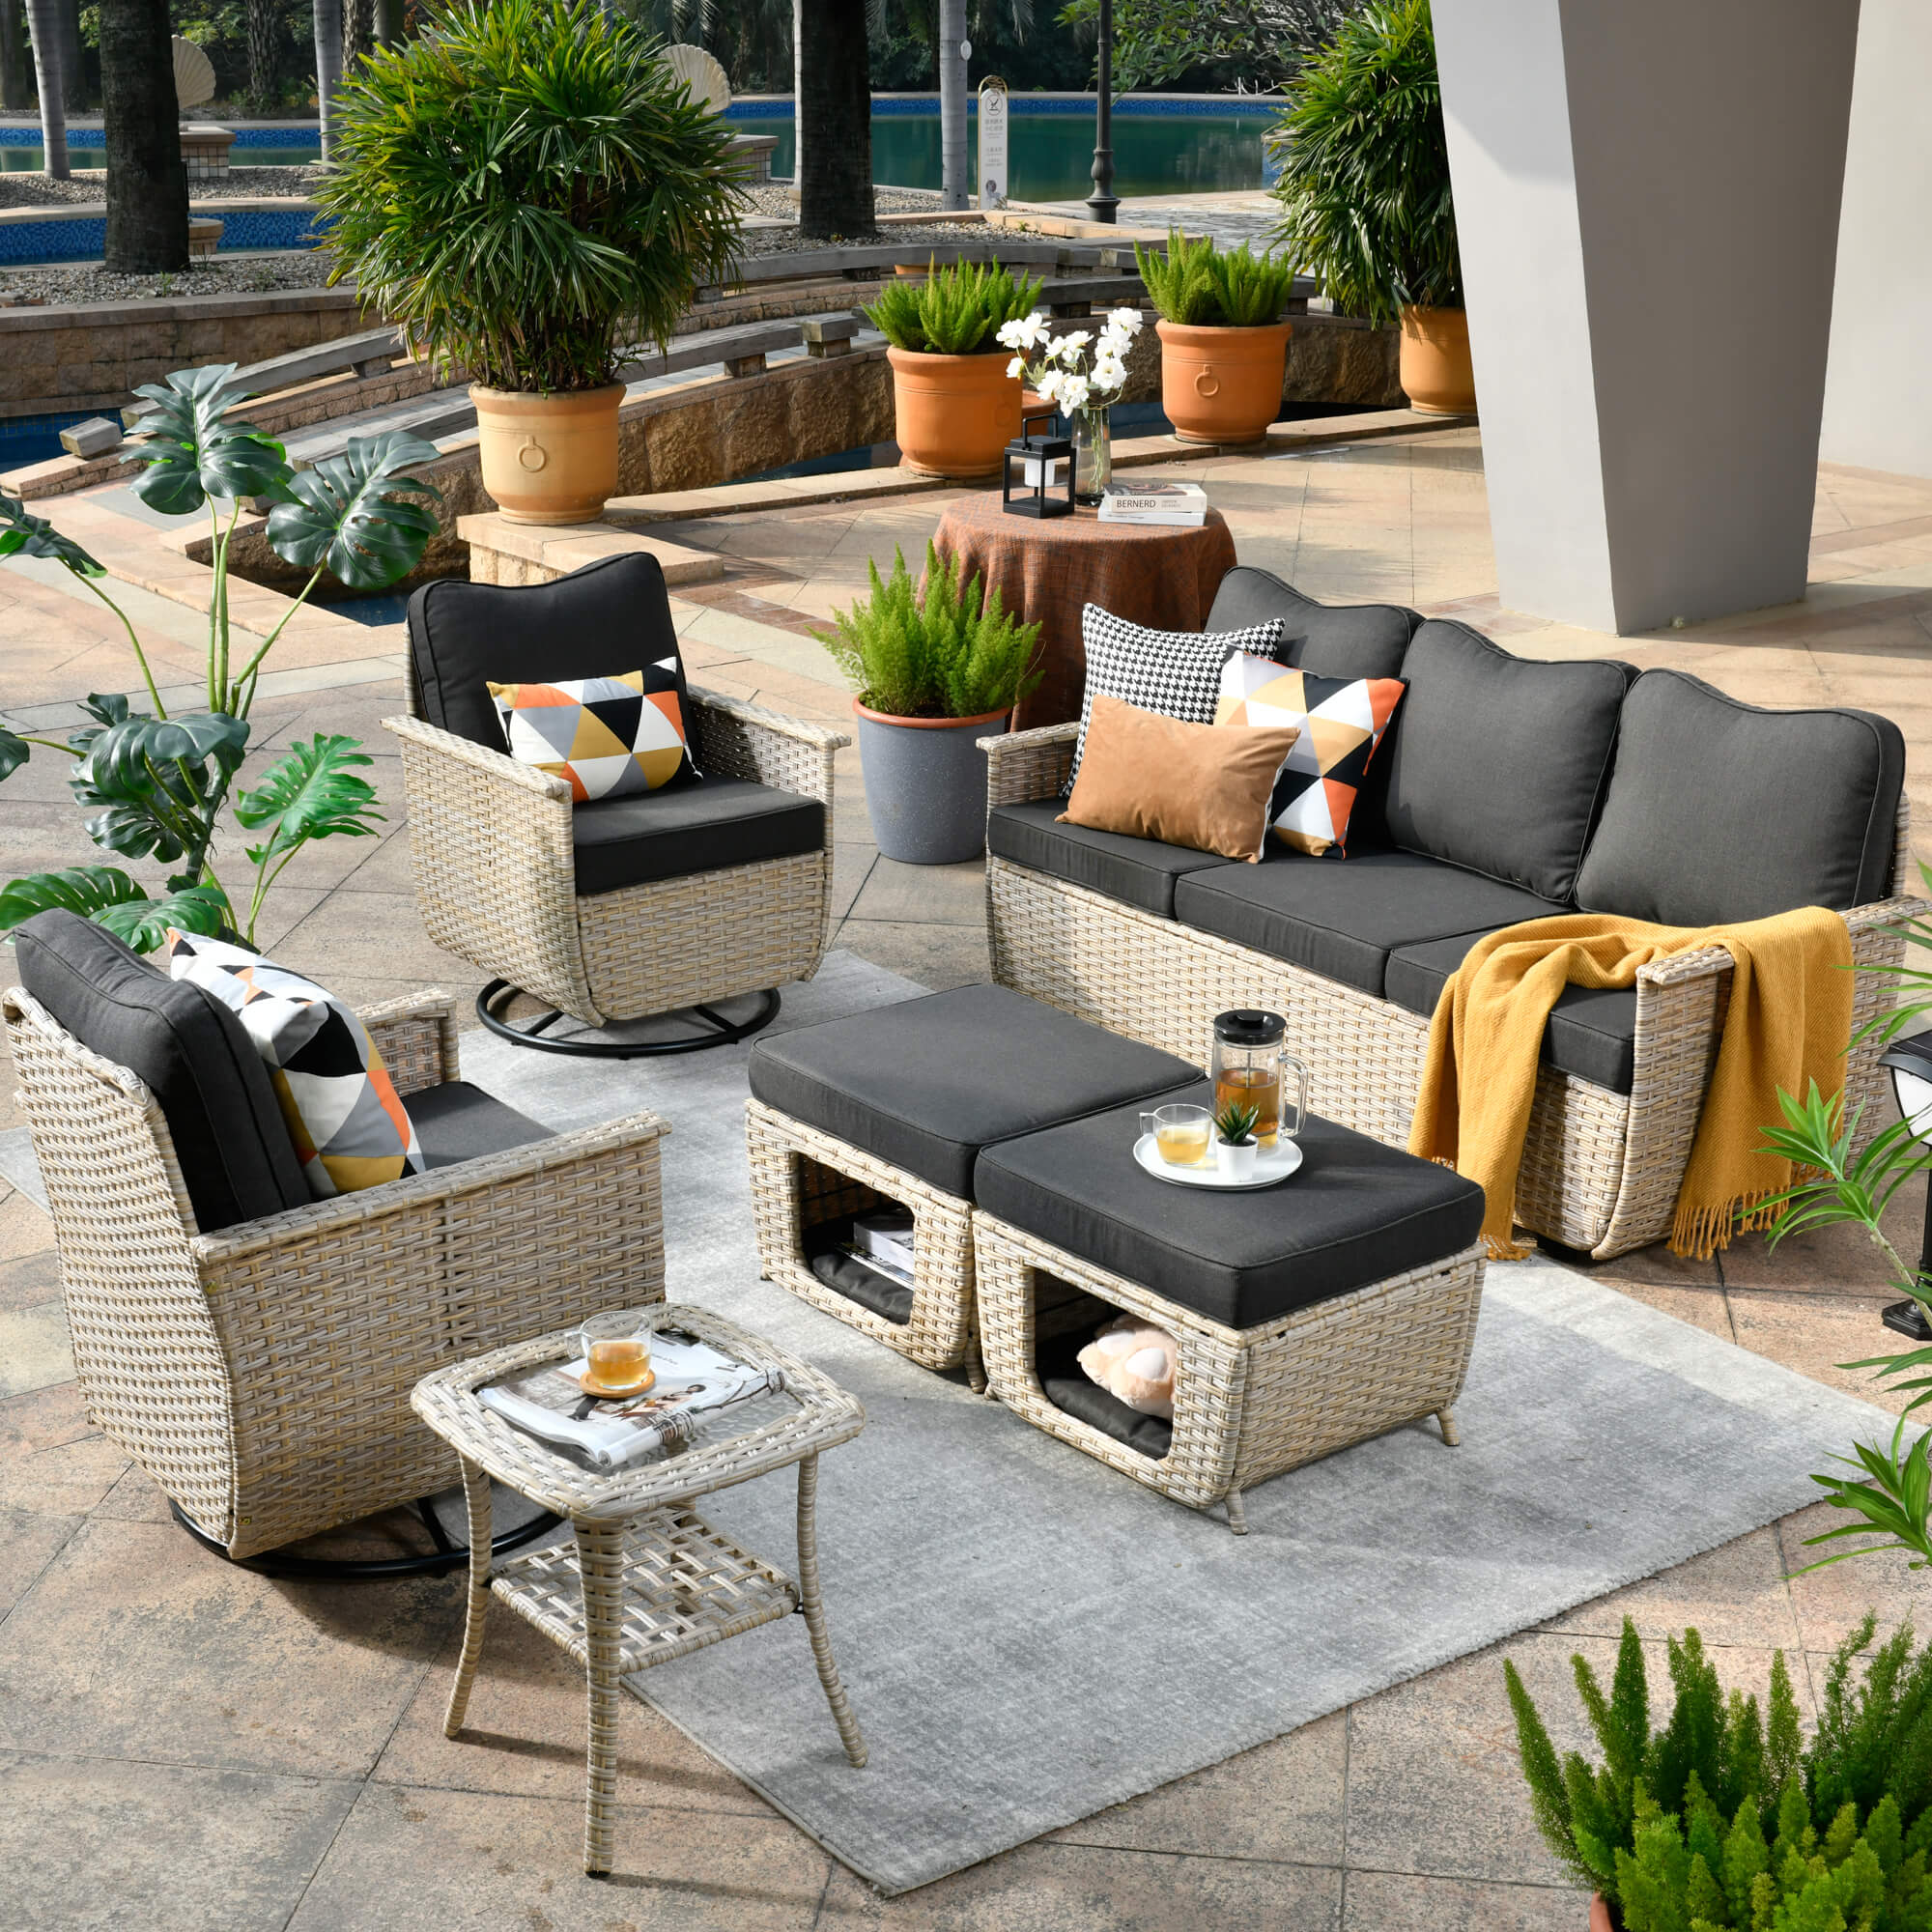 Ovios Outdoor Furniture 6 Pieces with 2 Swivel Chair Side Table and Multifunctional Storage